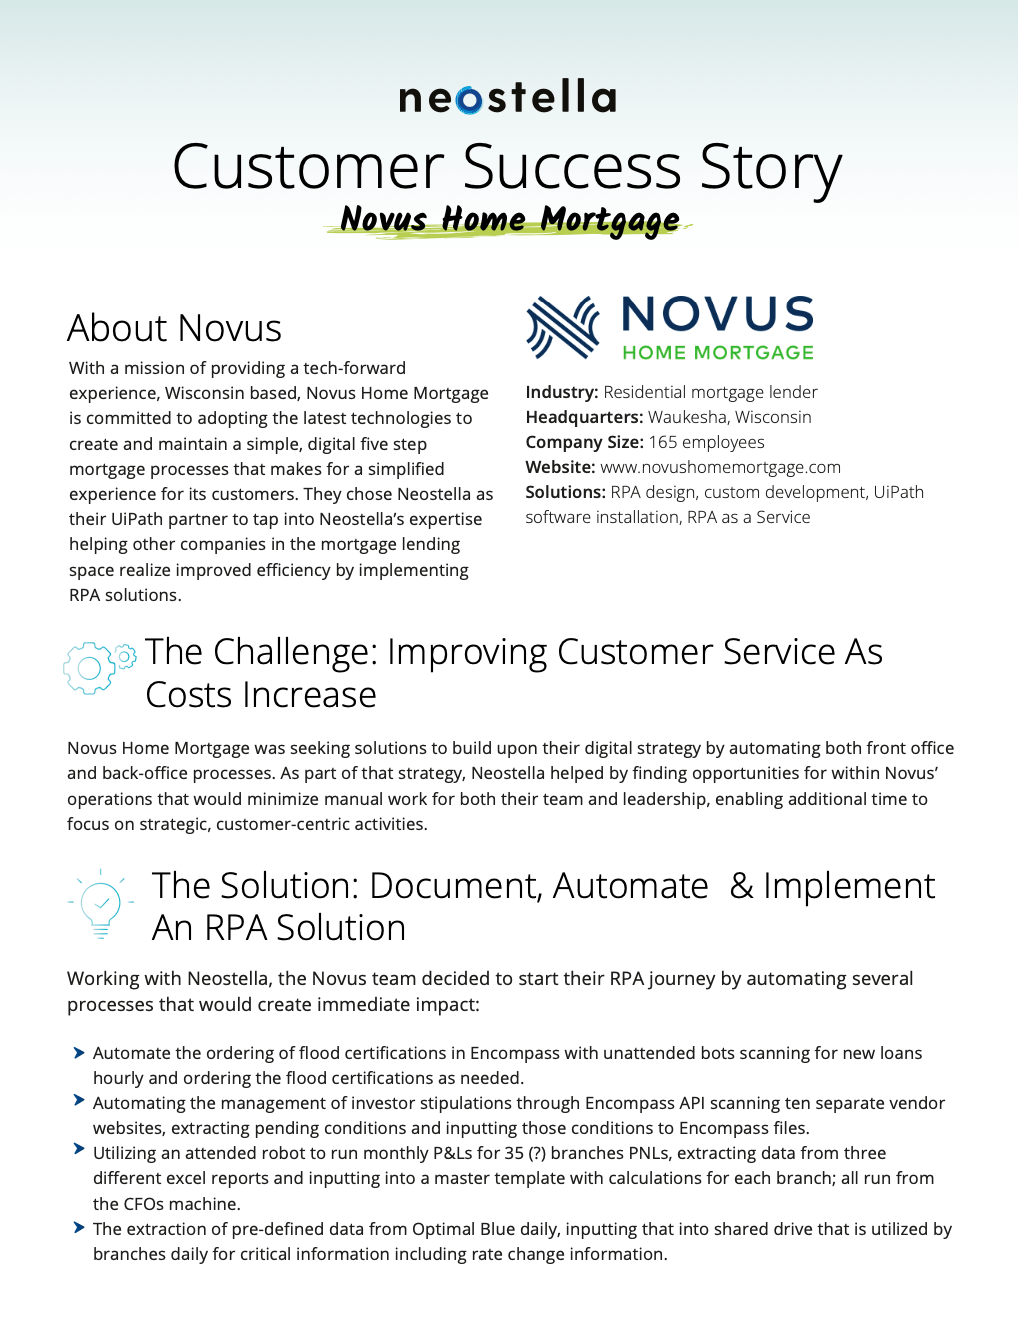 A preview of a download detailing a use case for RPA in mortgage industry and Novus Home Mortgage's customer story of using RPA to streamline operations.